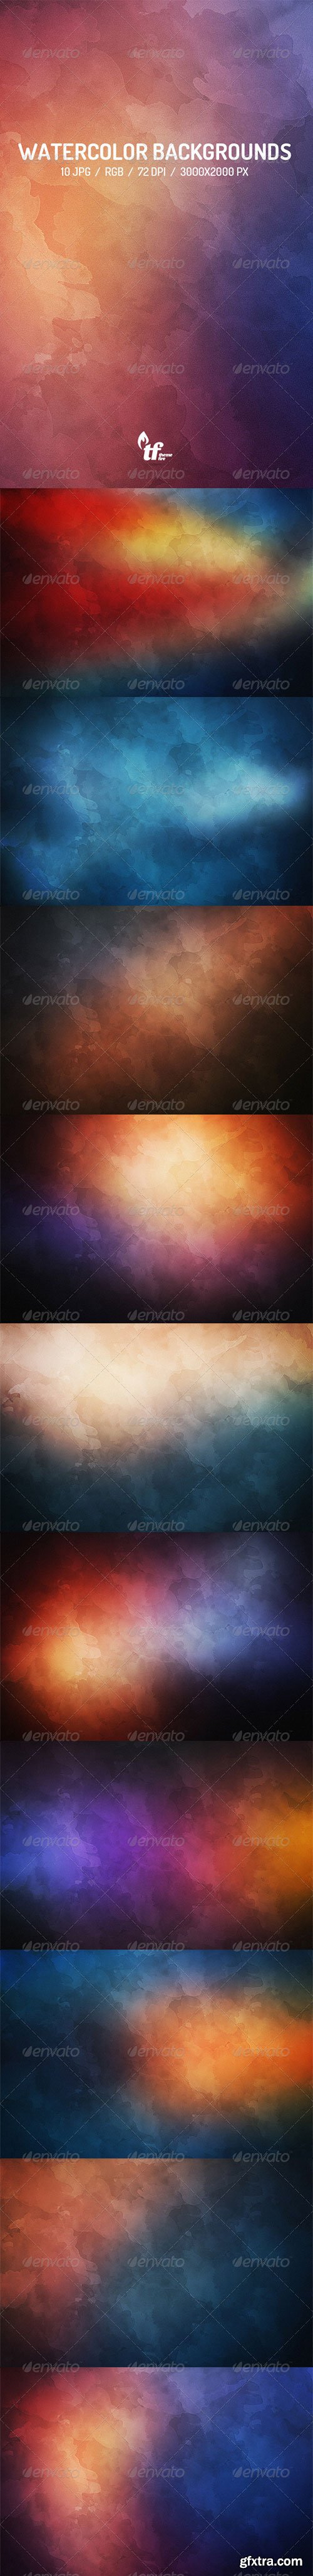 GraphicRiver - 10 Watercolor Backgrounds